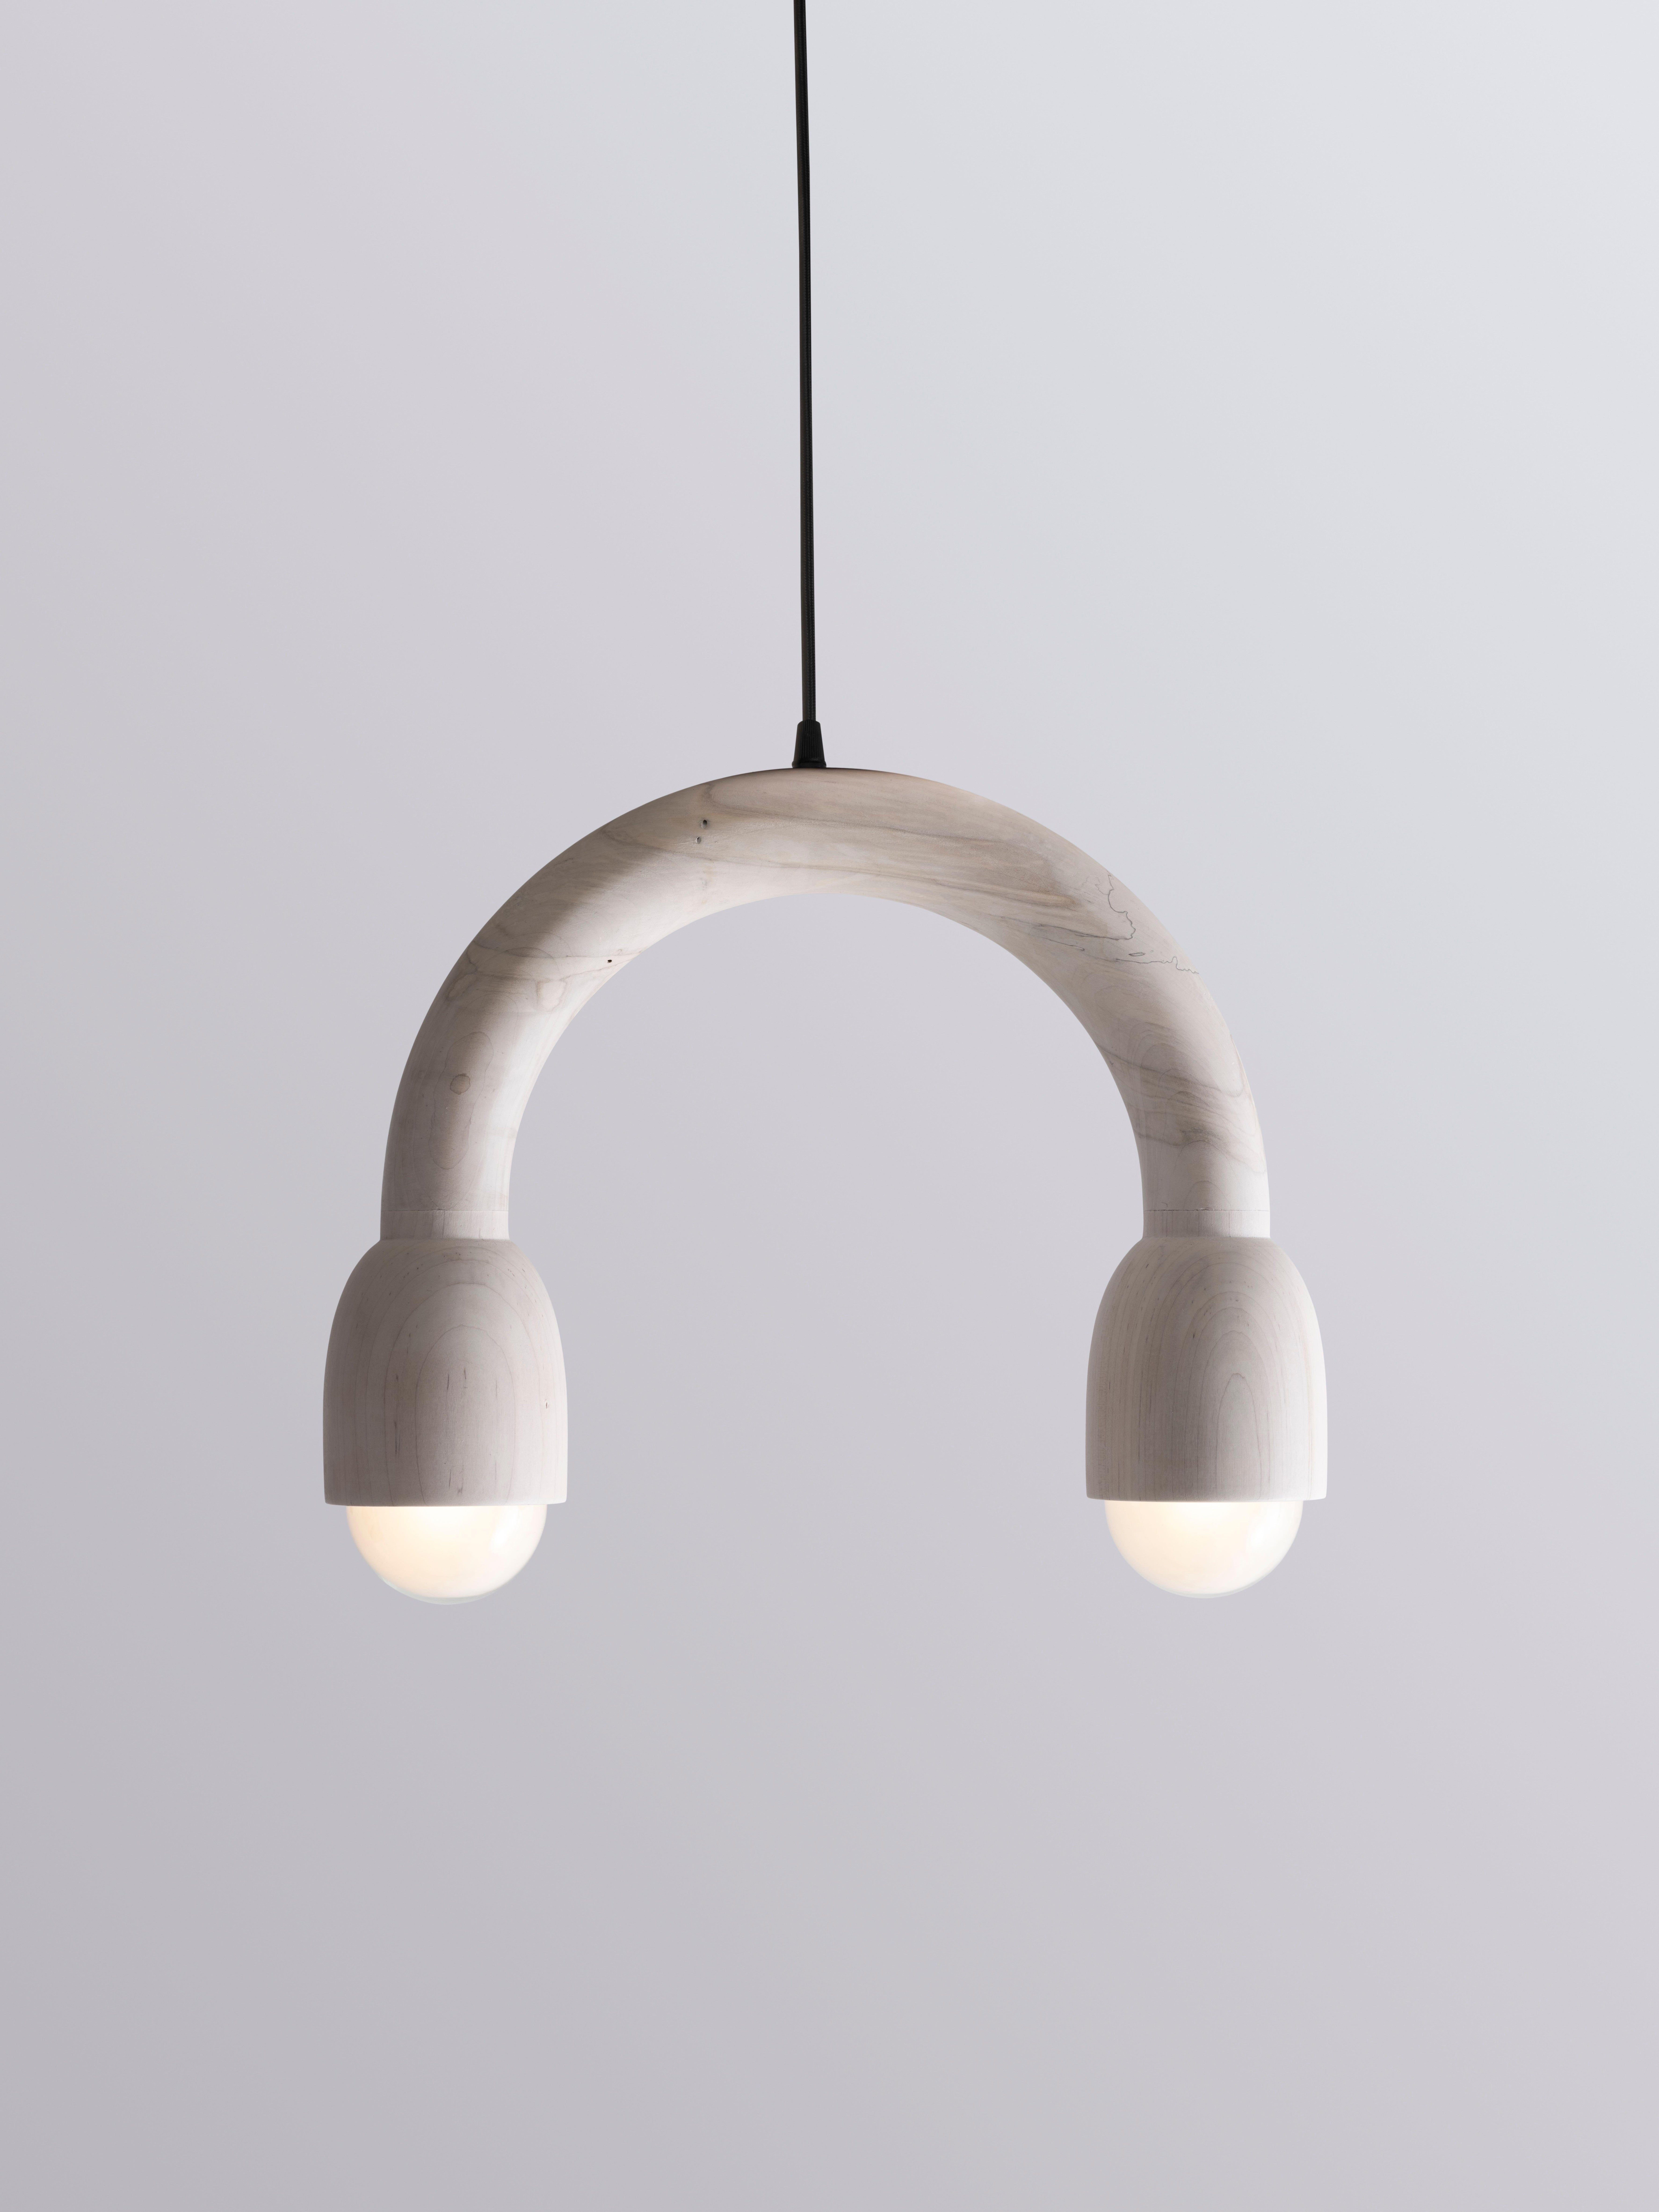 The Macaroni Light was created through an exploration of shaping solid Maple slab lumber. Designed to bring a smile to any space, each light part is thoughtfully selected to highlight the grain pattern and characteristics of the material. Each globe